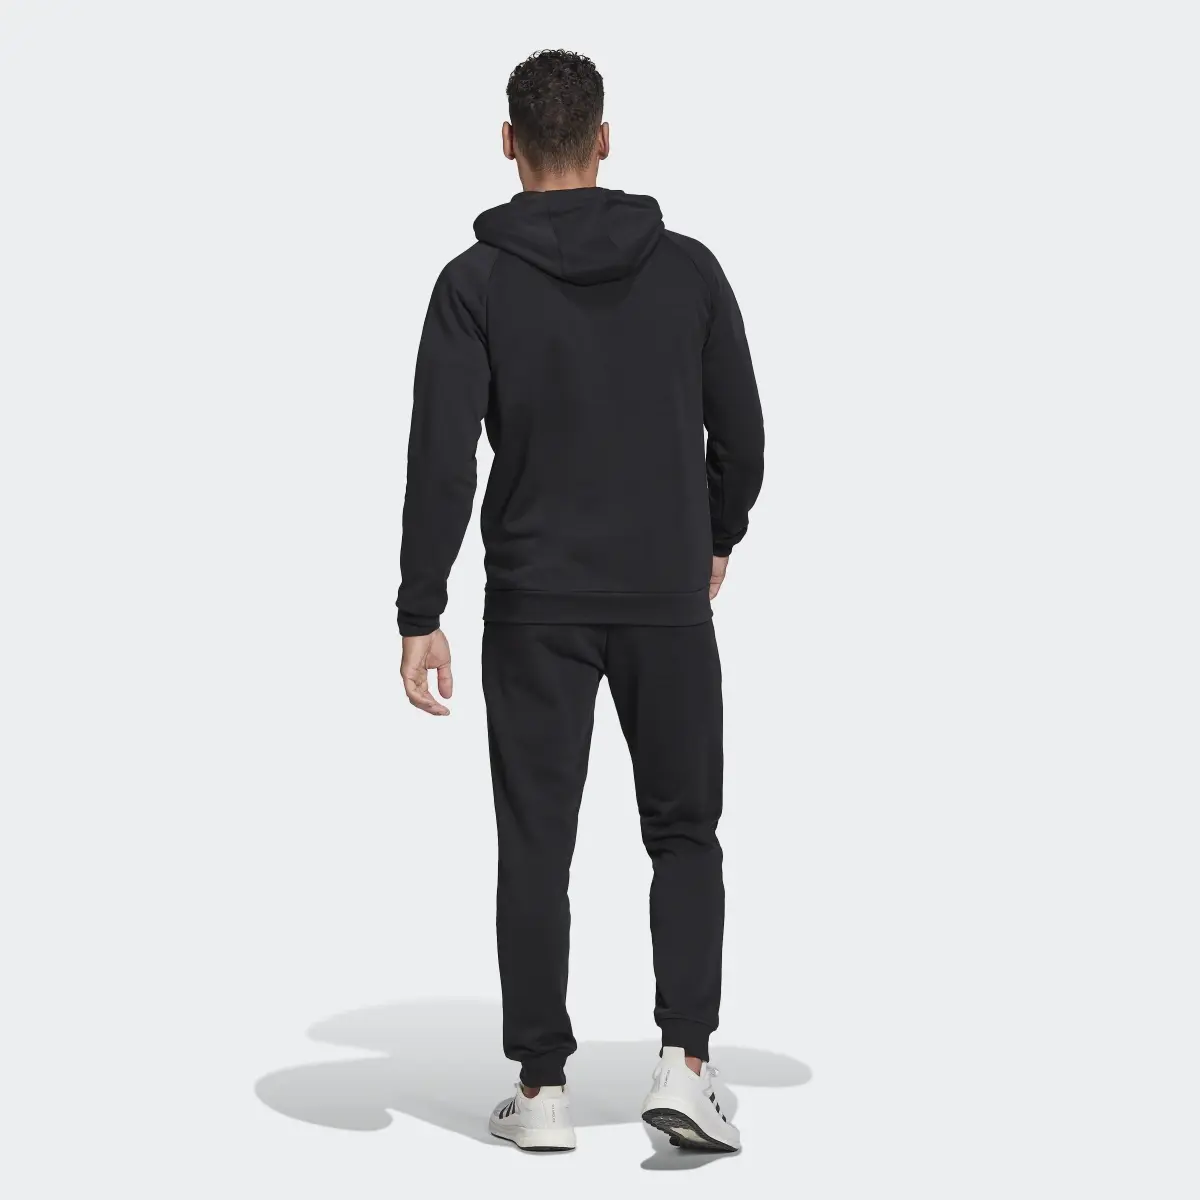 Adidas Cotton Piping Tracksuit. 3